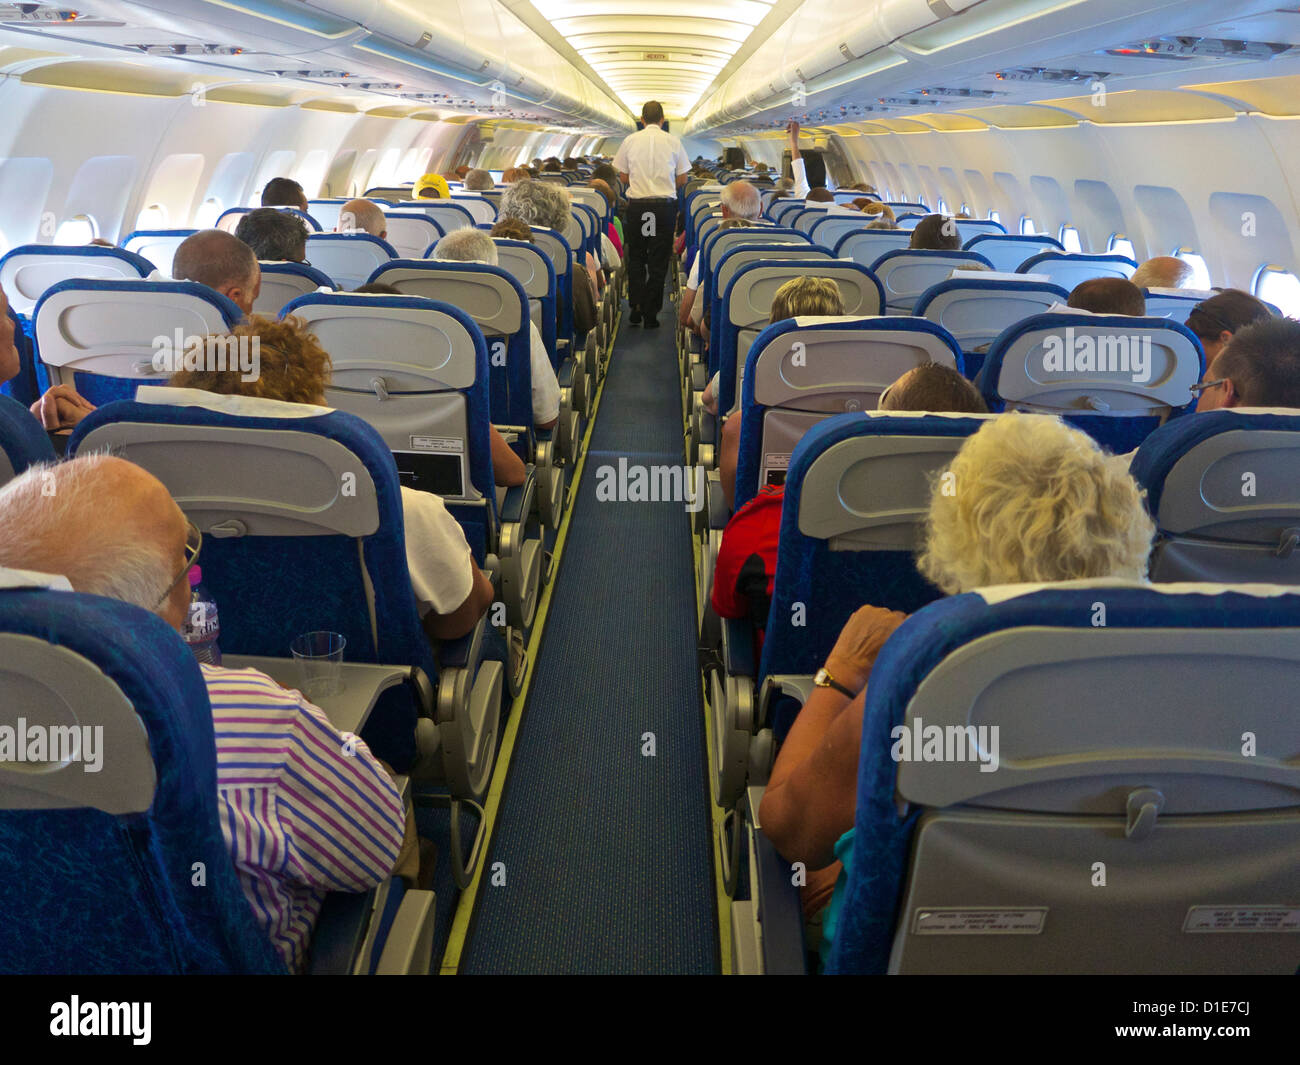 Airbus A320 plane inside cabin with passengers, France, Europe Stock Photo